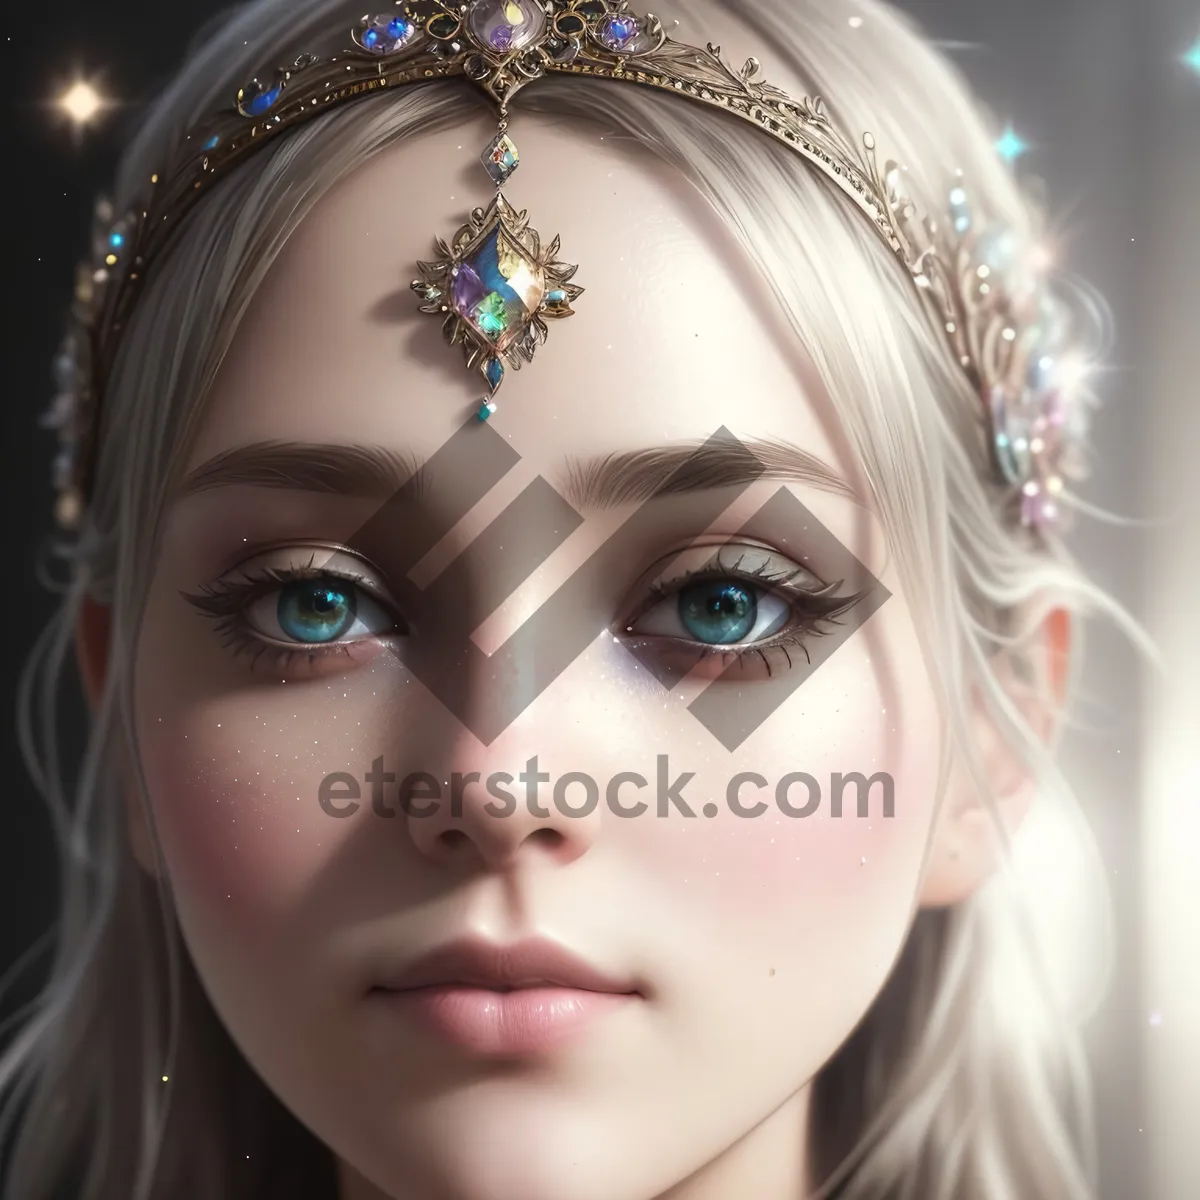 Picture of Pretty Doll with Crown: Fashionable Makeup and Cute Smile